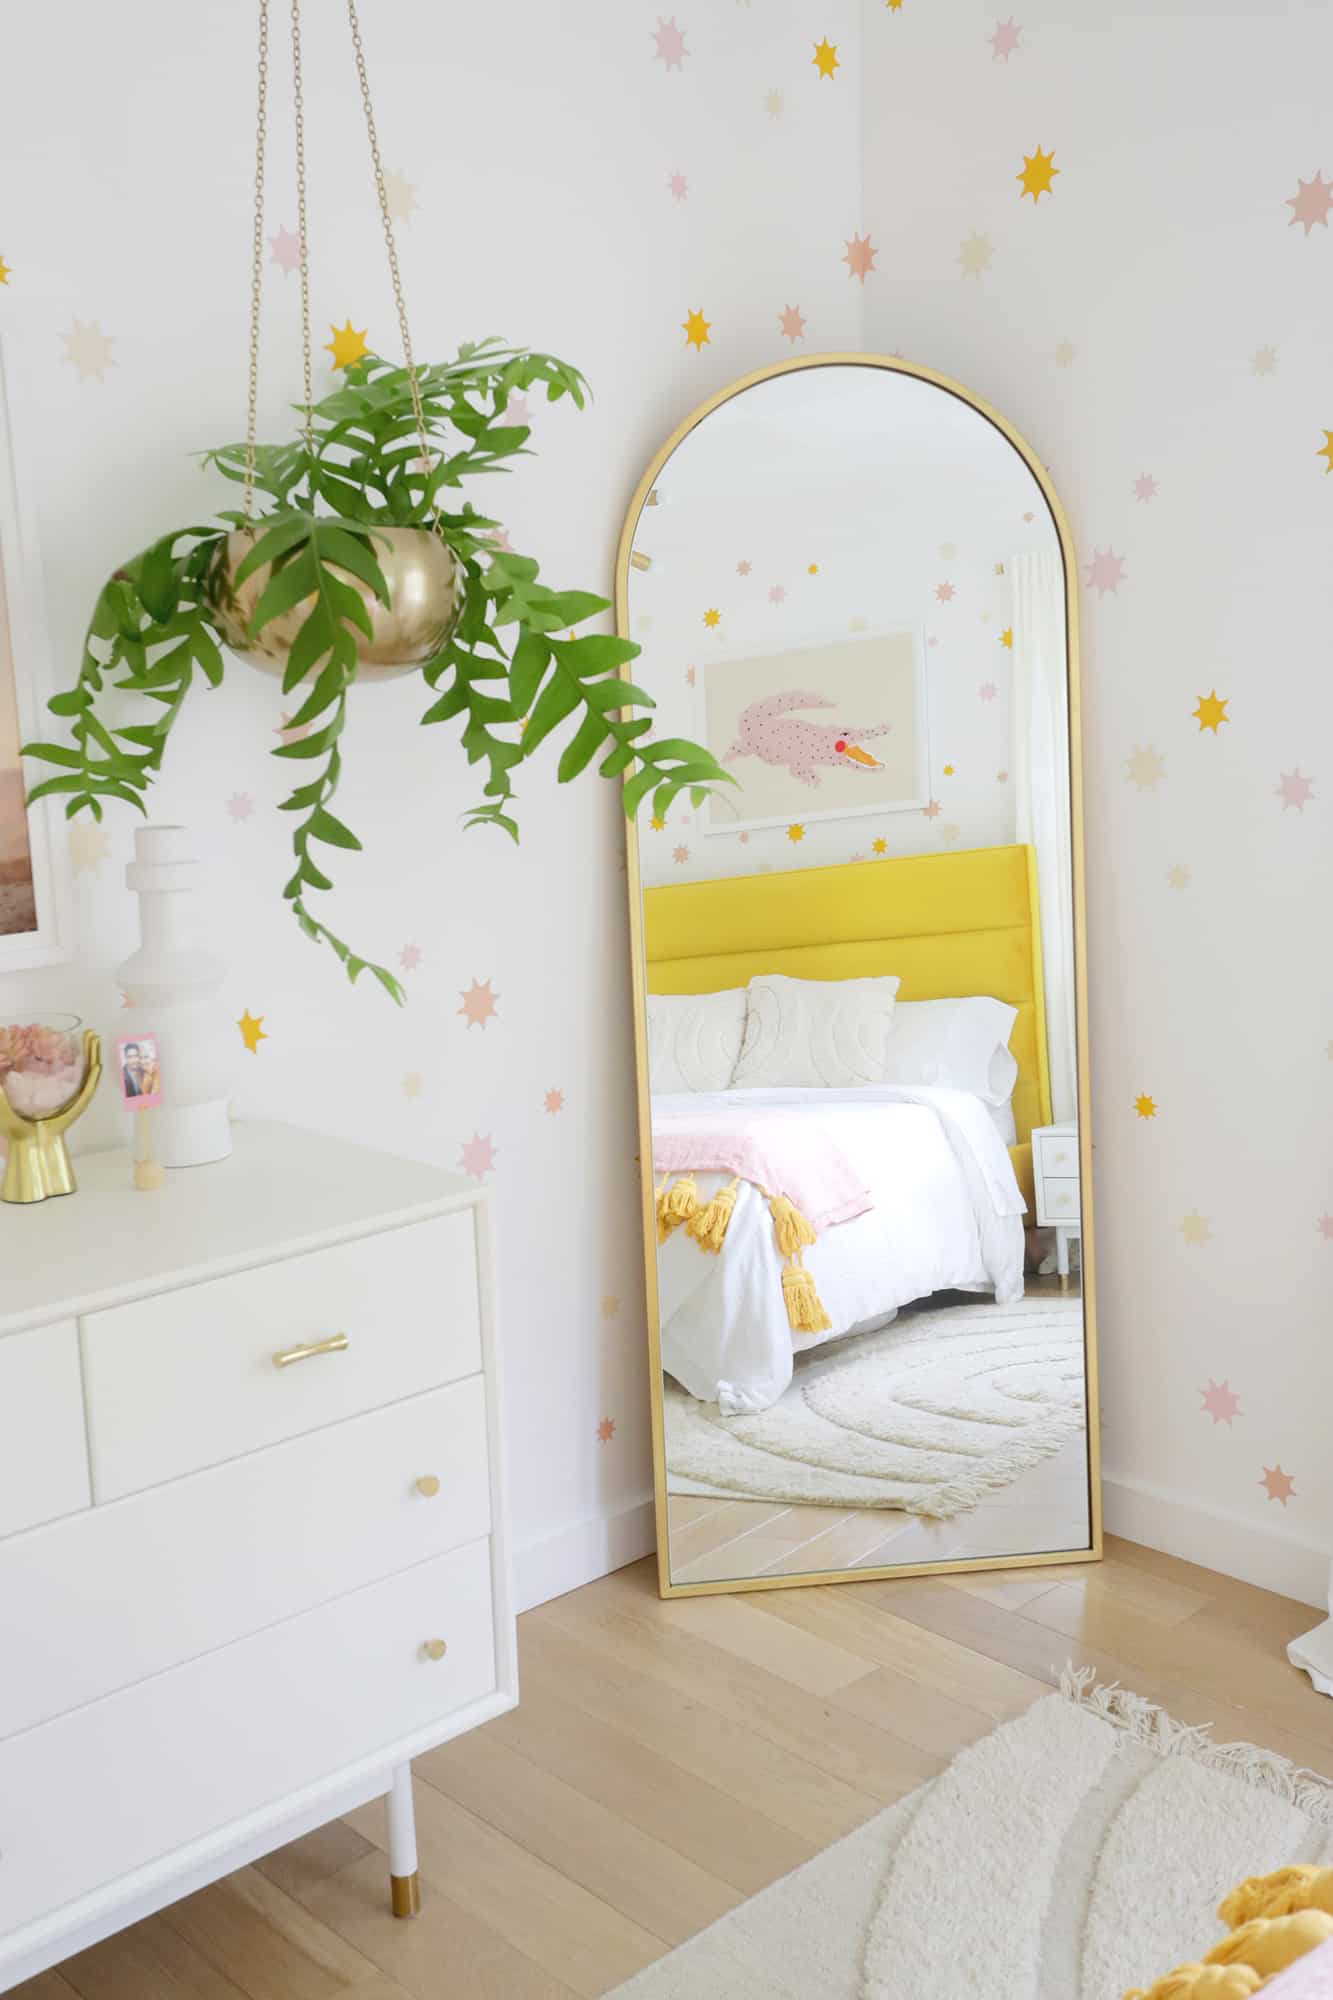 mirror with reflection of the bed frame and floor hanging on the side